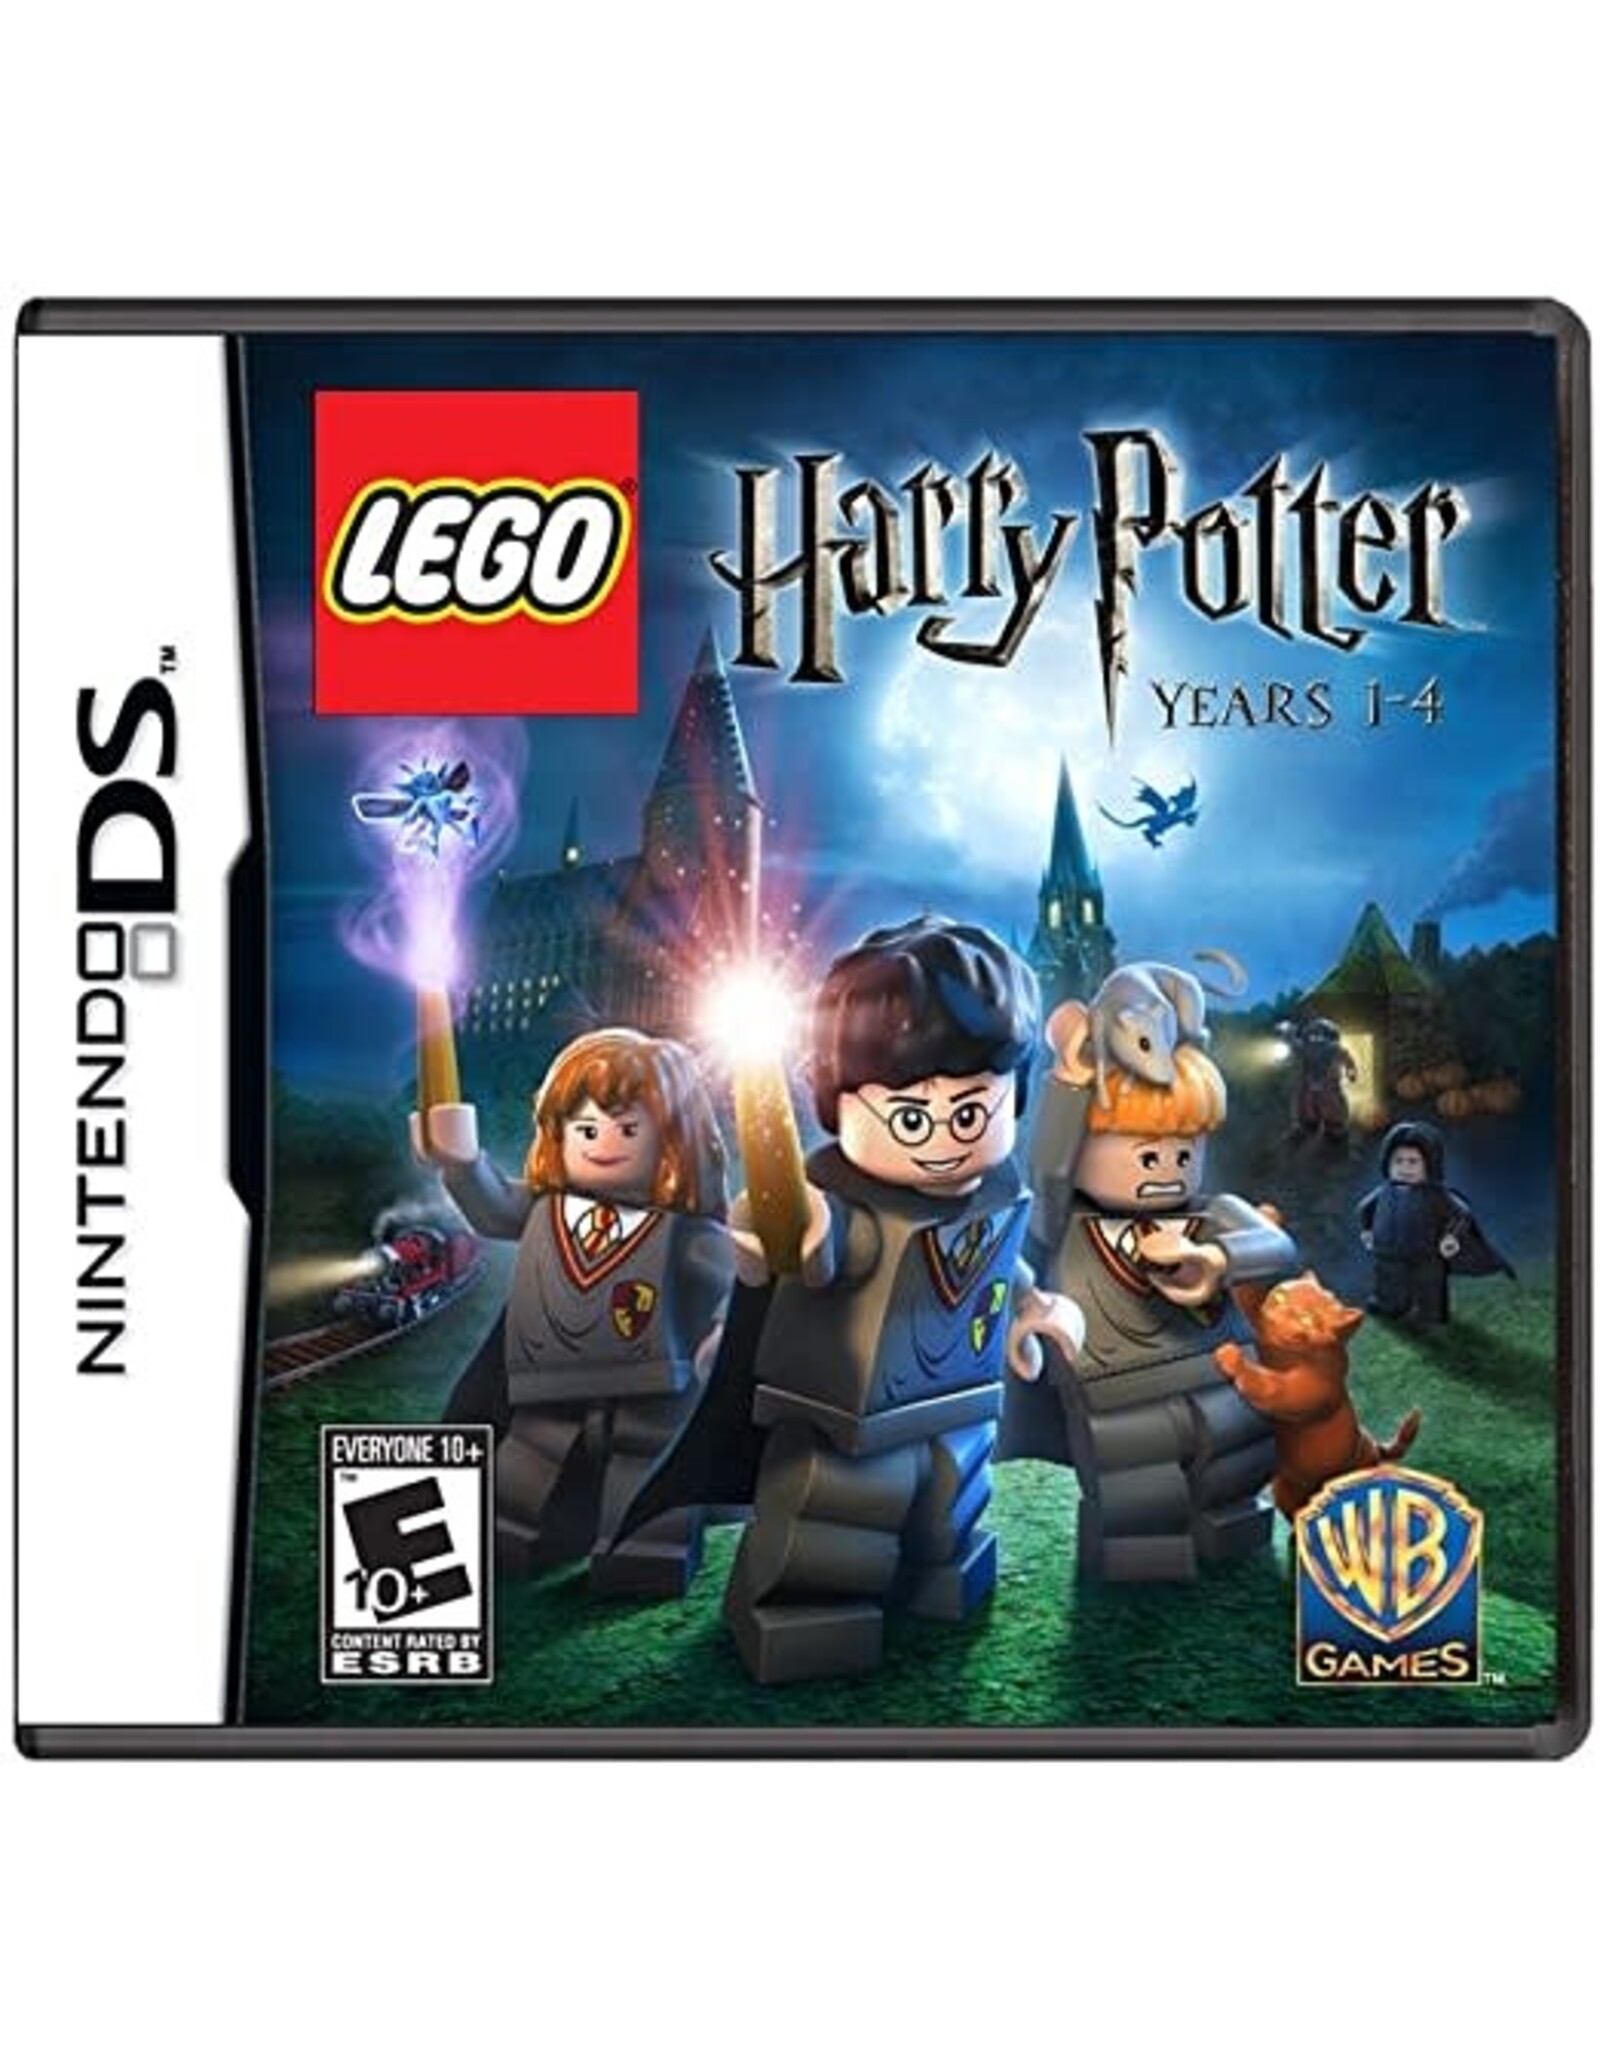 Nintendo DS LEGO Harry Potter: Years 1-4 (Cart Only)